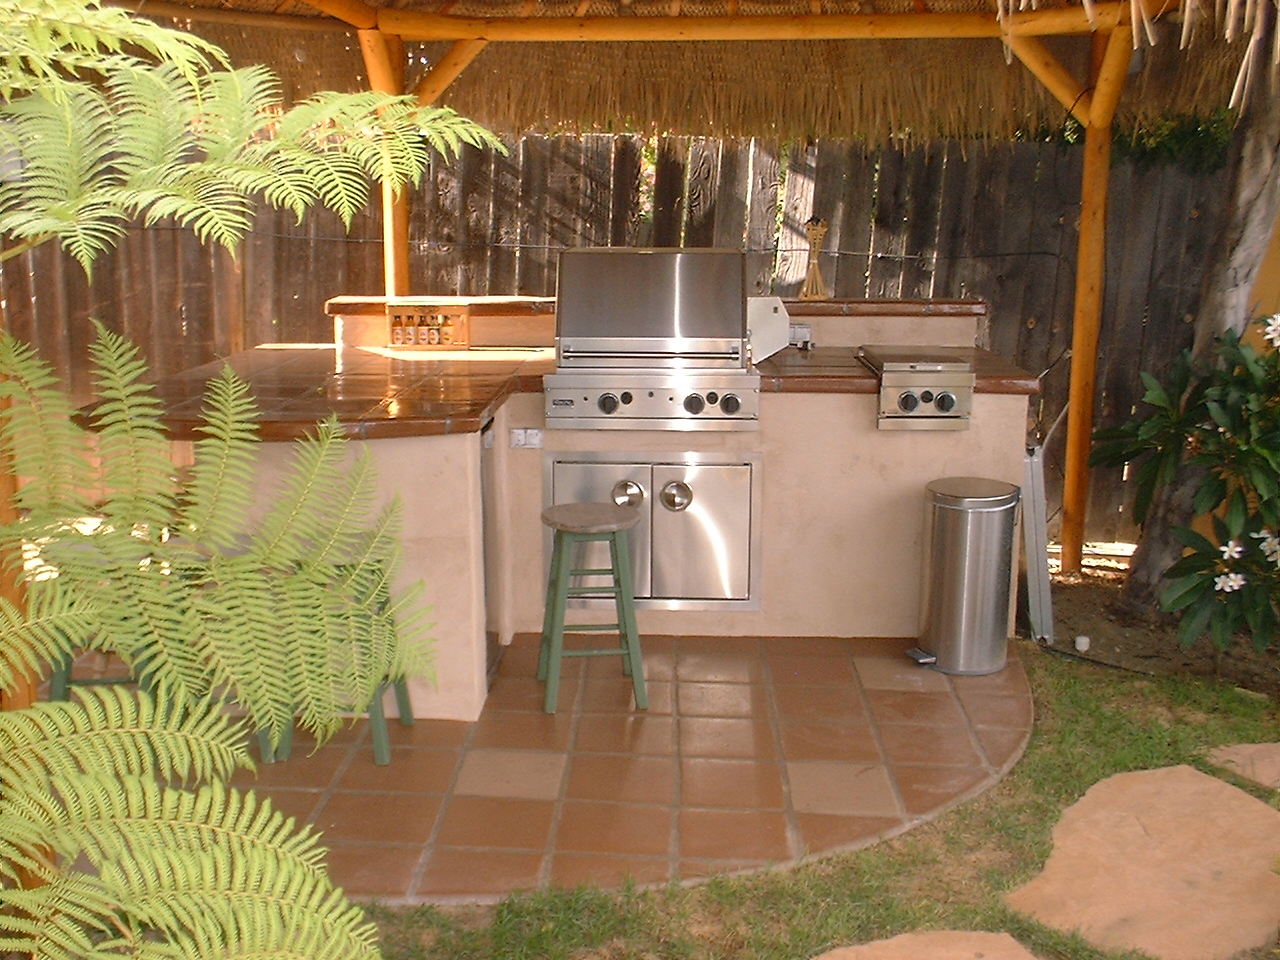 An Outdoor Kitchen Space With Barbeque Stand